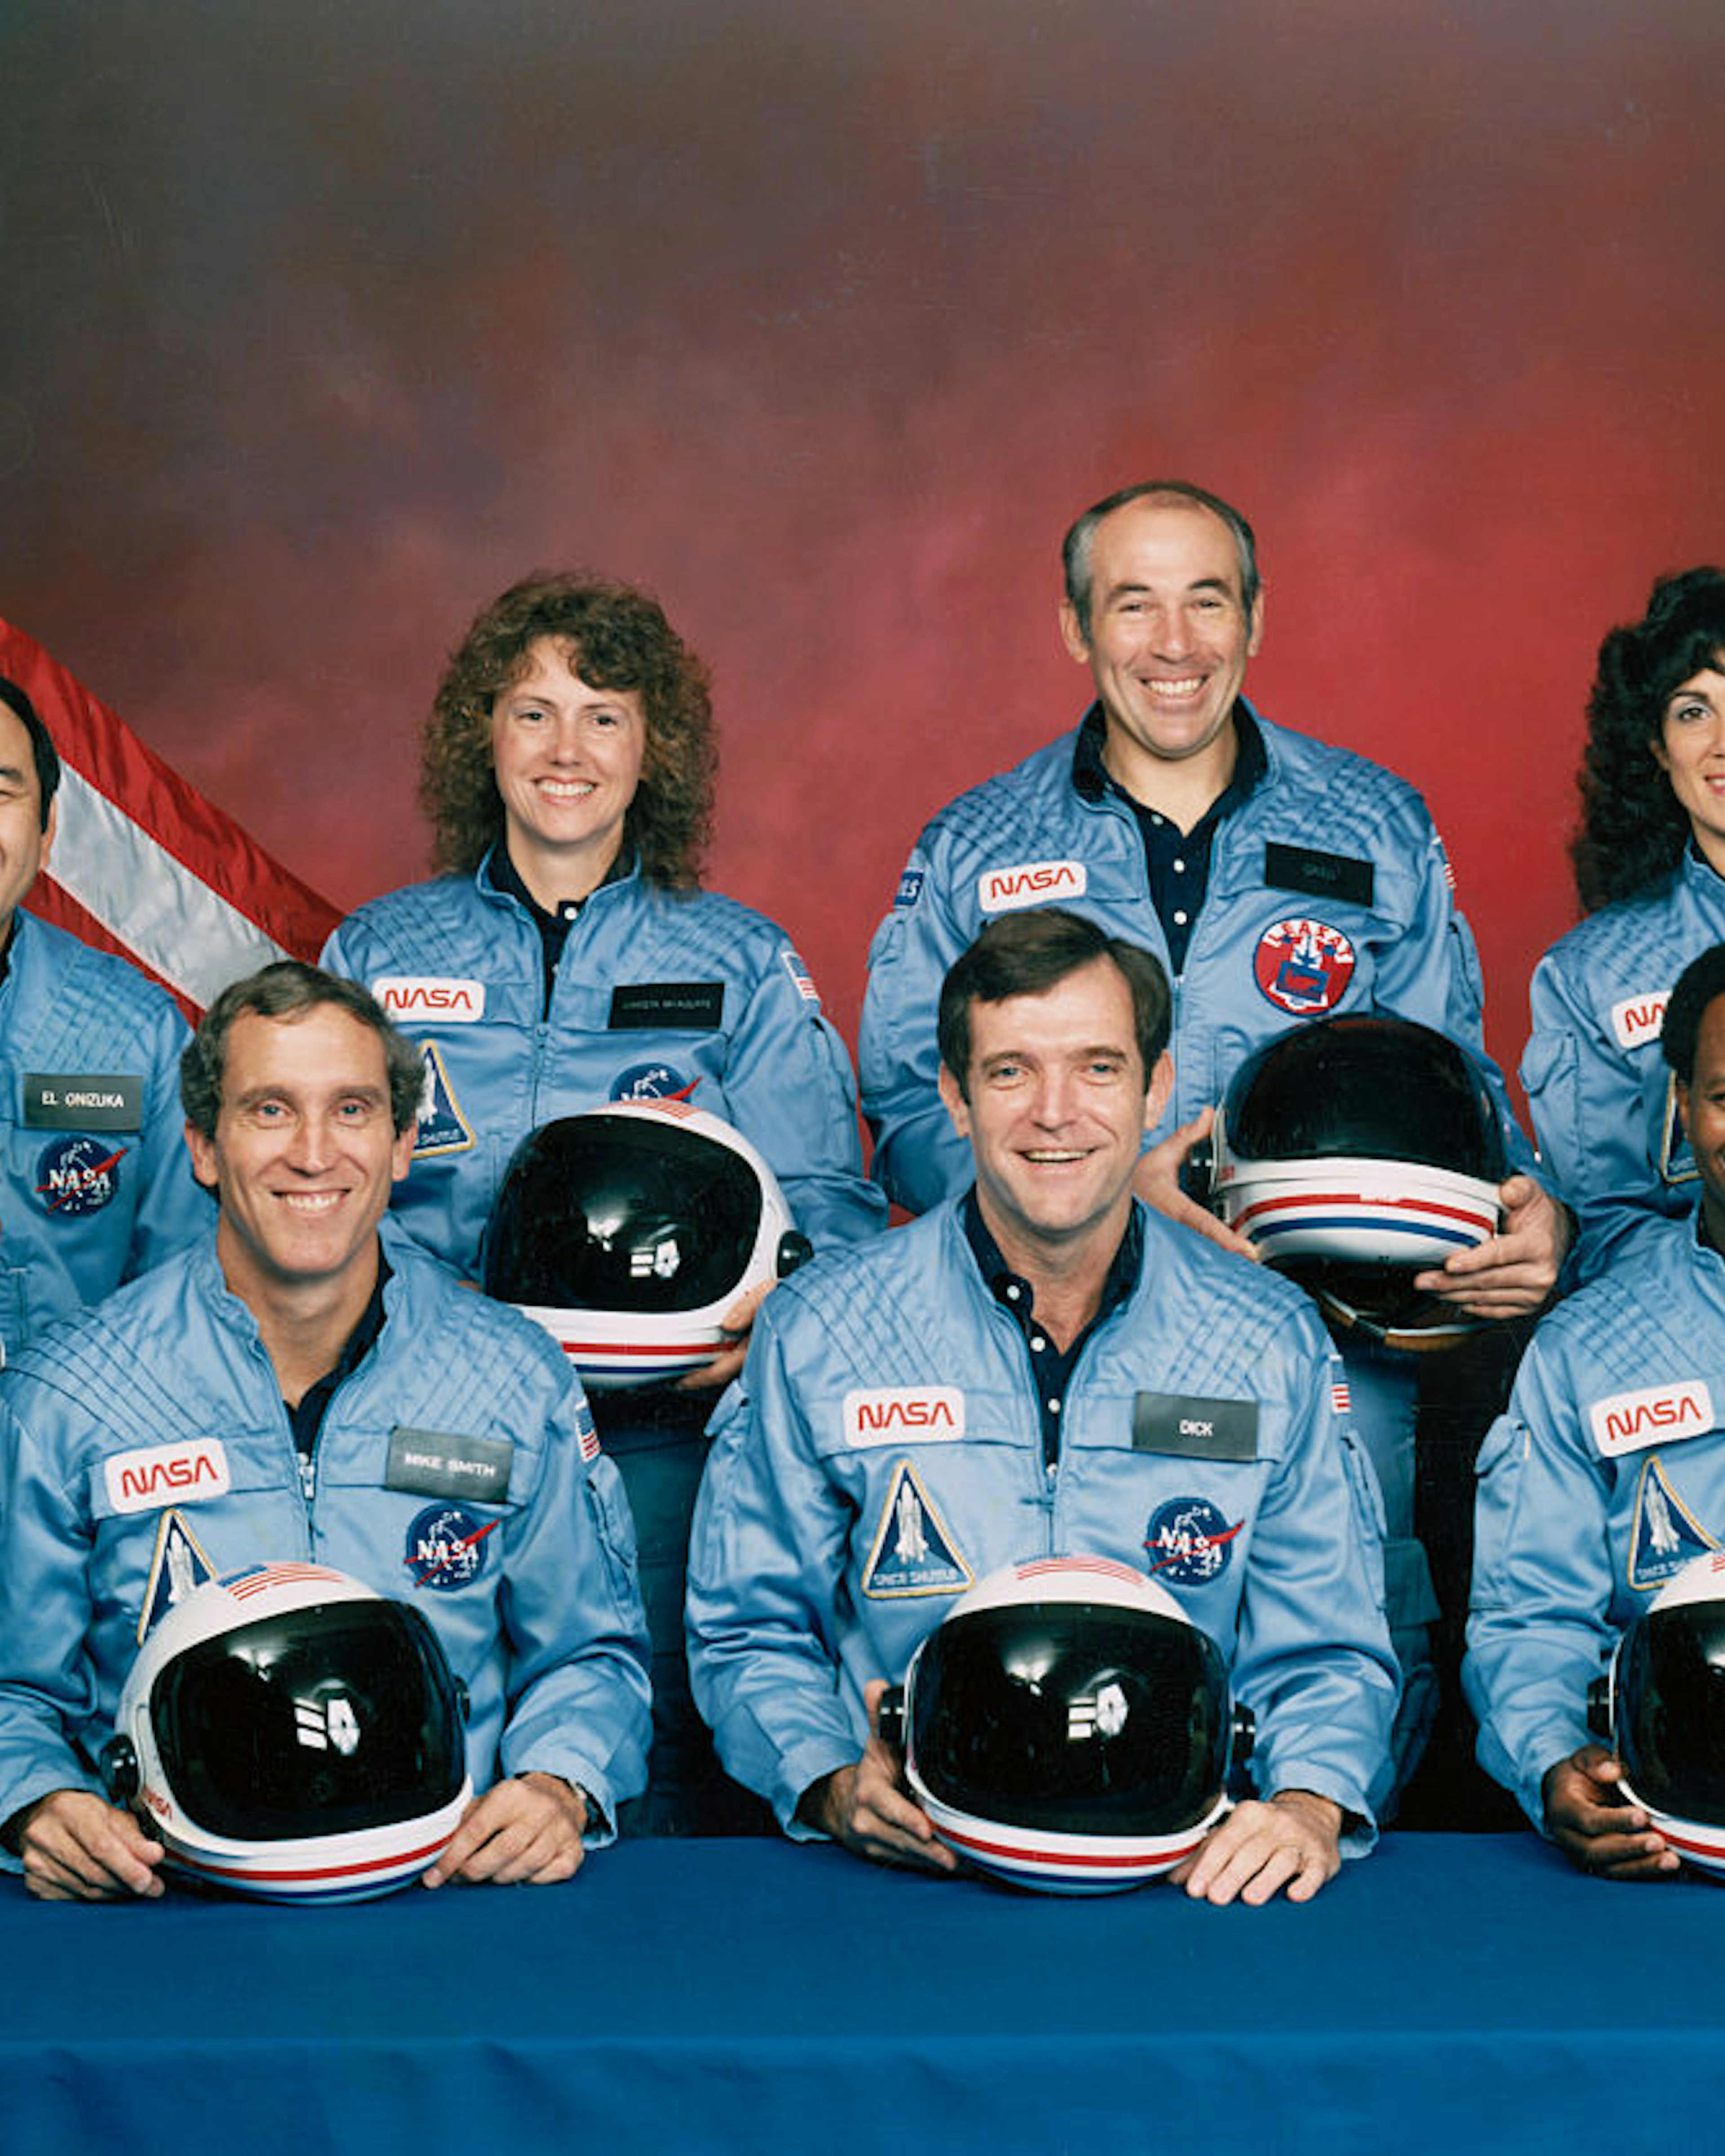 (Original Caption) Five astronauts and two payload specialists make up the STS 51-L crew, scheduled to fly aboard the Space Shuttle Challenger in January of 1986. Crewmembers are (left to right, front row) astronauts Michael J. Smith, Francis R. (Dick) Scobee and Ronald E. McNair; and Ellison S. Onizuka, Sharon Christa McAuliffe, Gregory Jarvis and Judith A. Resnik. McAuliffe and Jarvis are payload specialists, representing the Teacher in Space Project and Hughes Co., respectively.